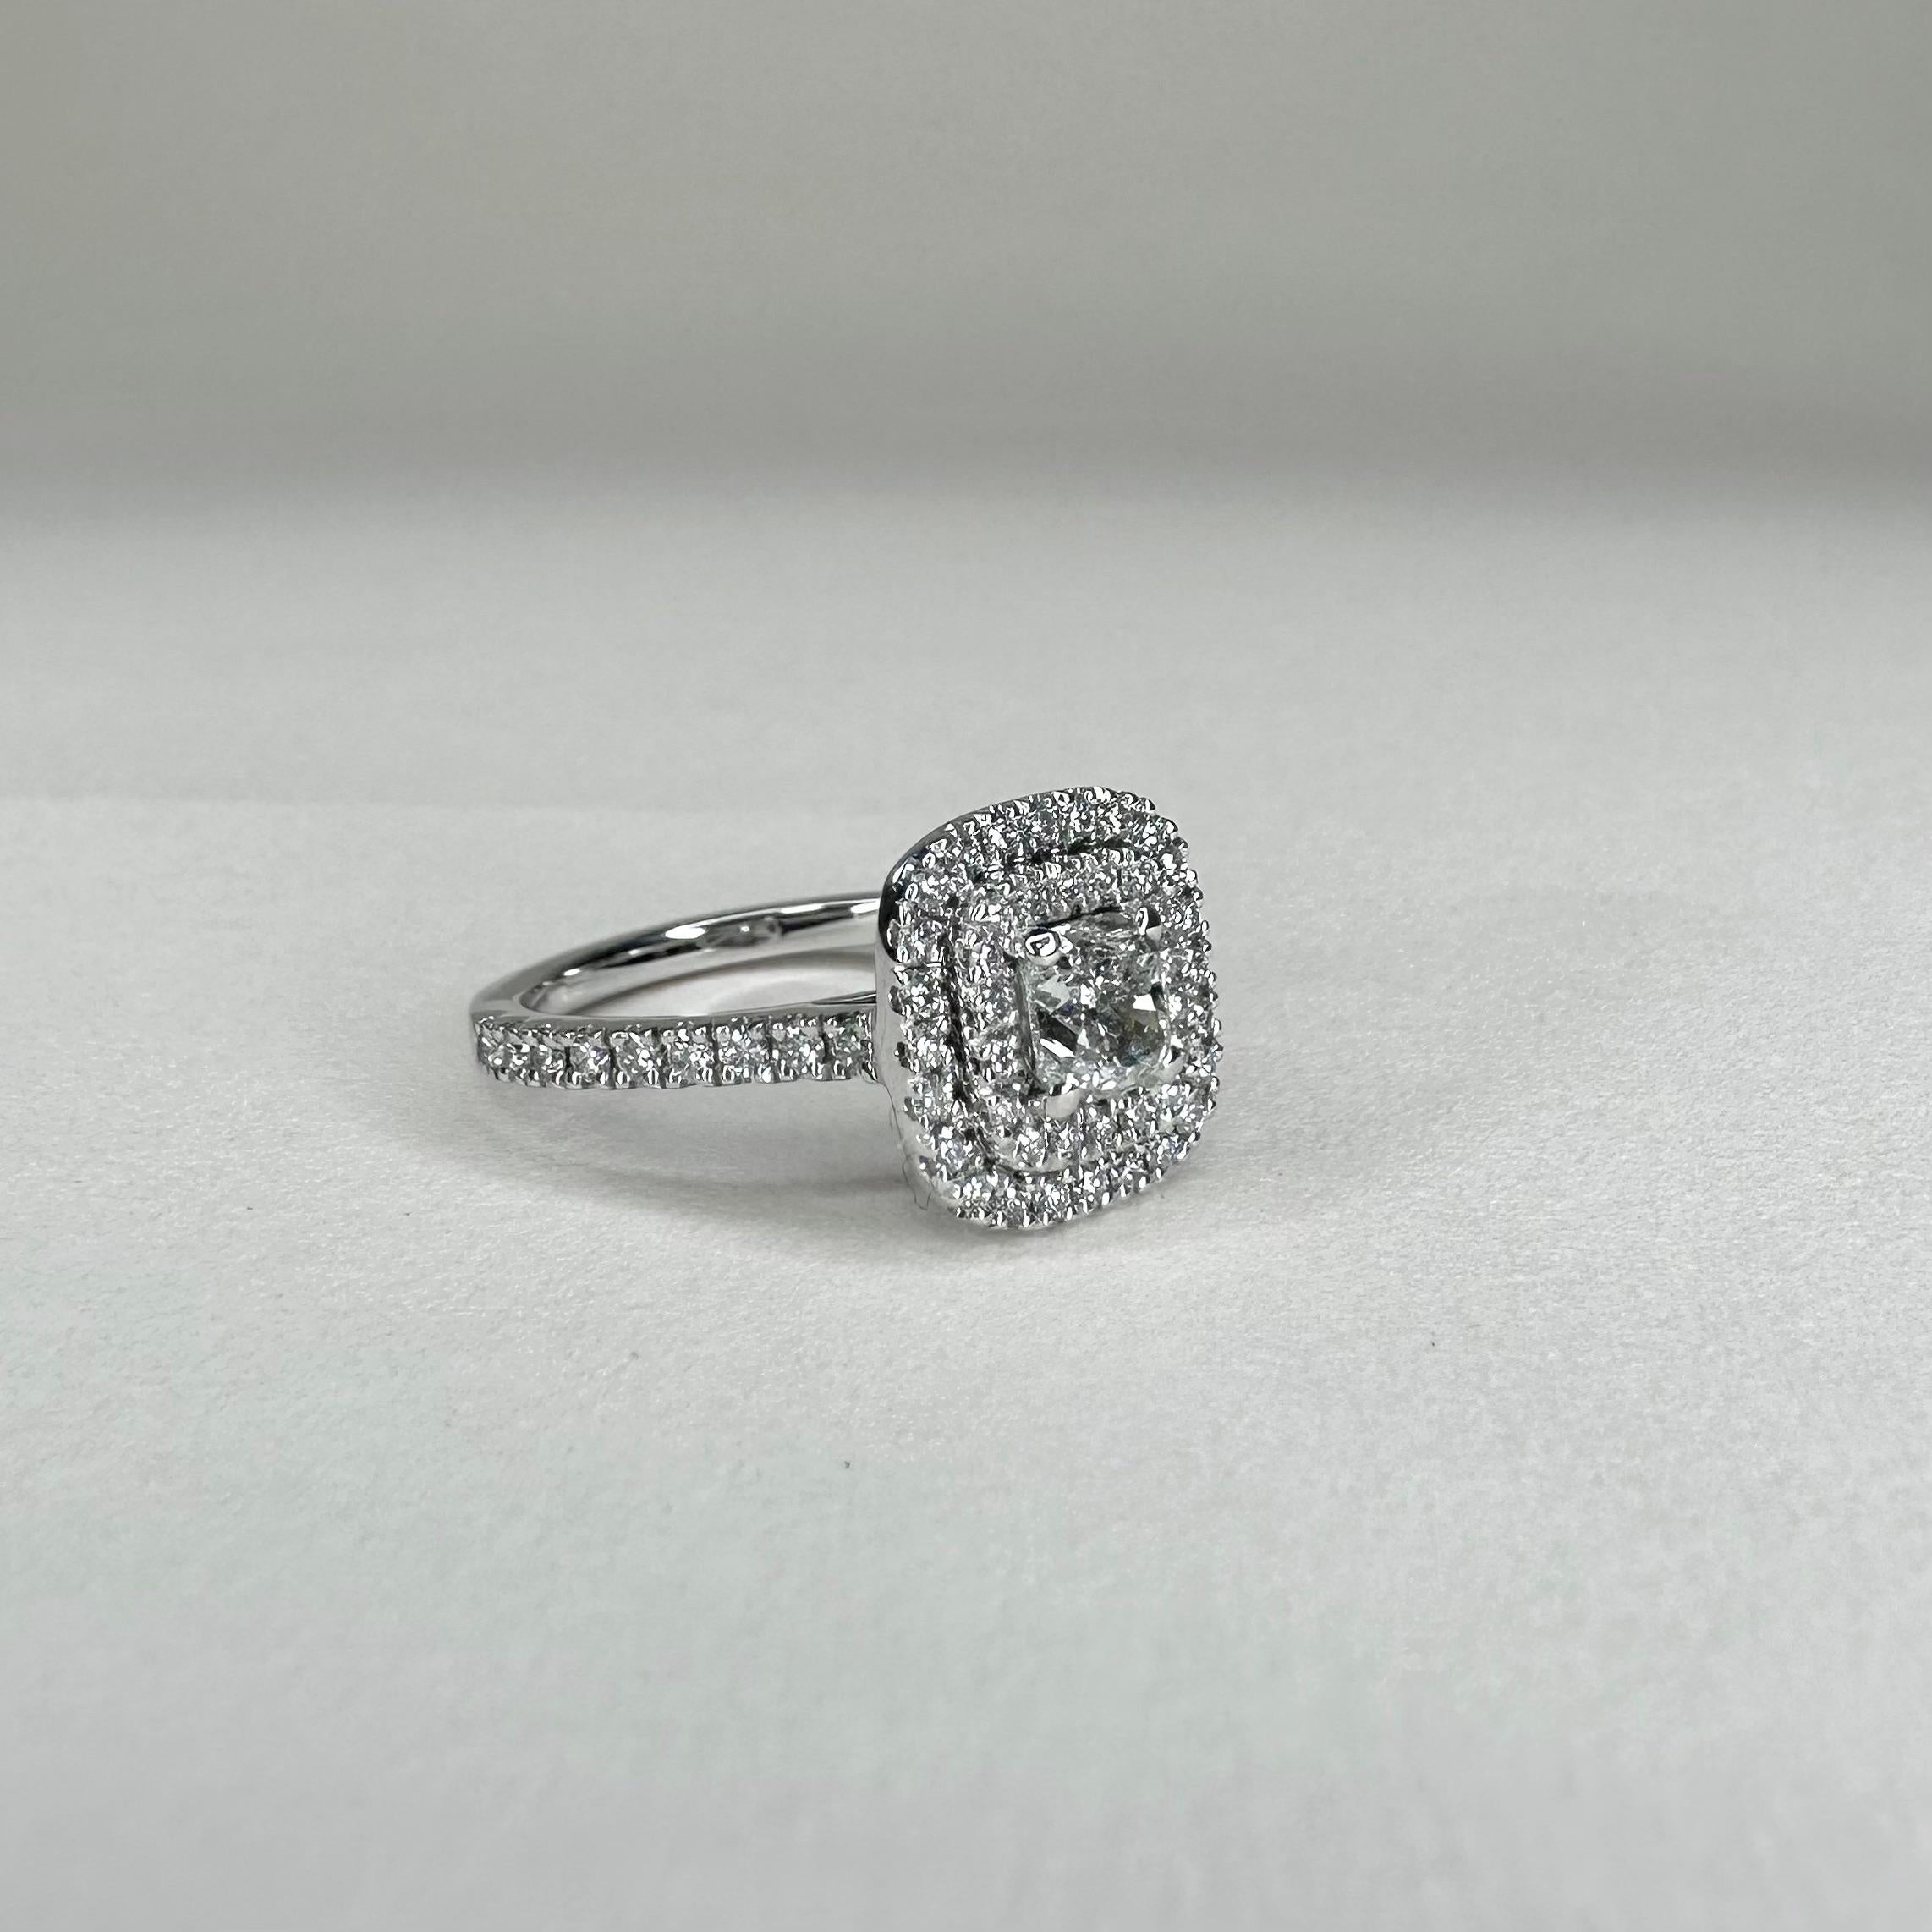 For Sale:  Art Deco Style 18k White Gold 0.70 Ct Diamond Ring GIA Certified with 0.55 Cts 7